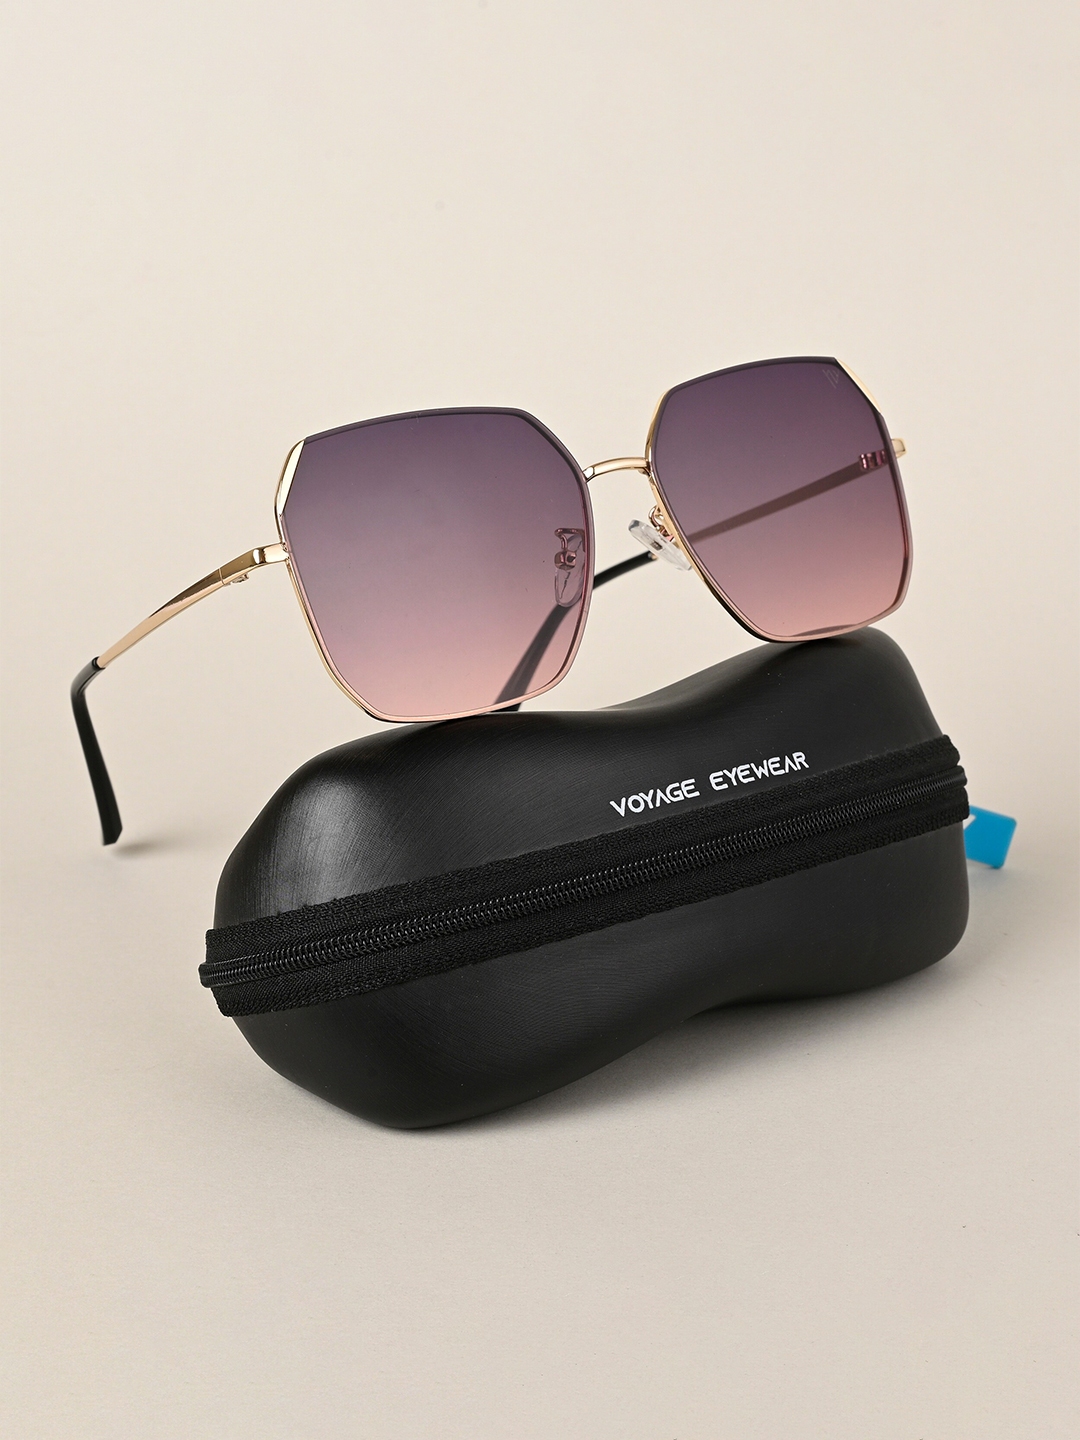 Buy Voyage Unisex Square Sunglasses With Uv Protected Lens Mg Sunglasses For Unisex